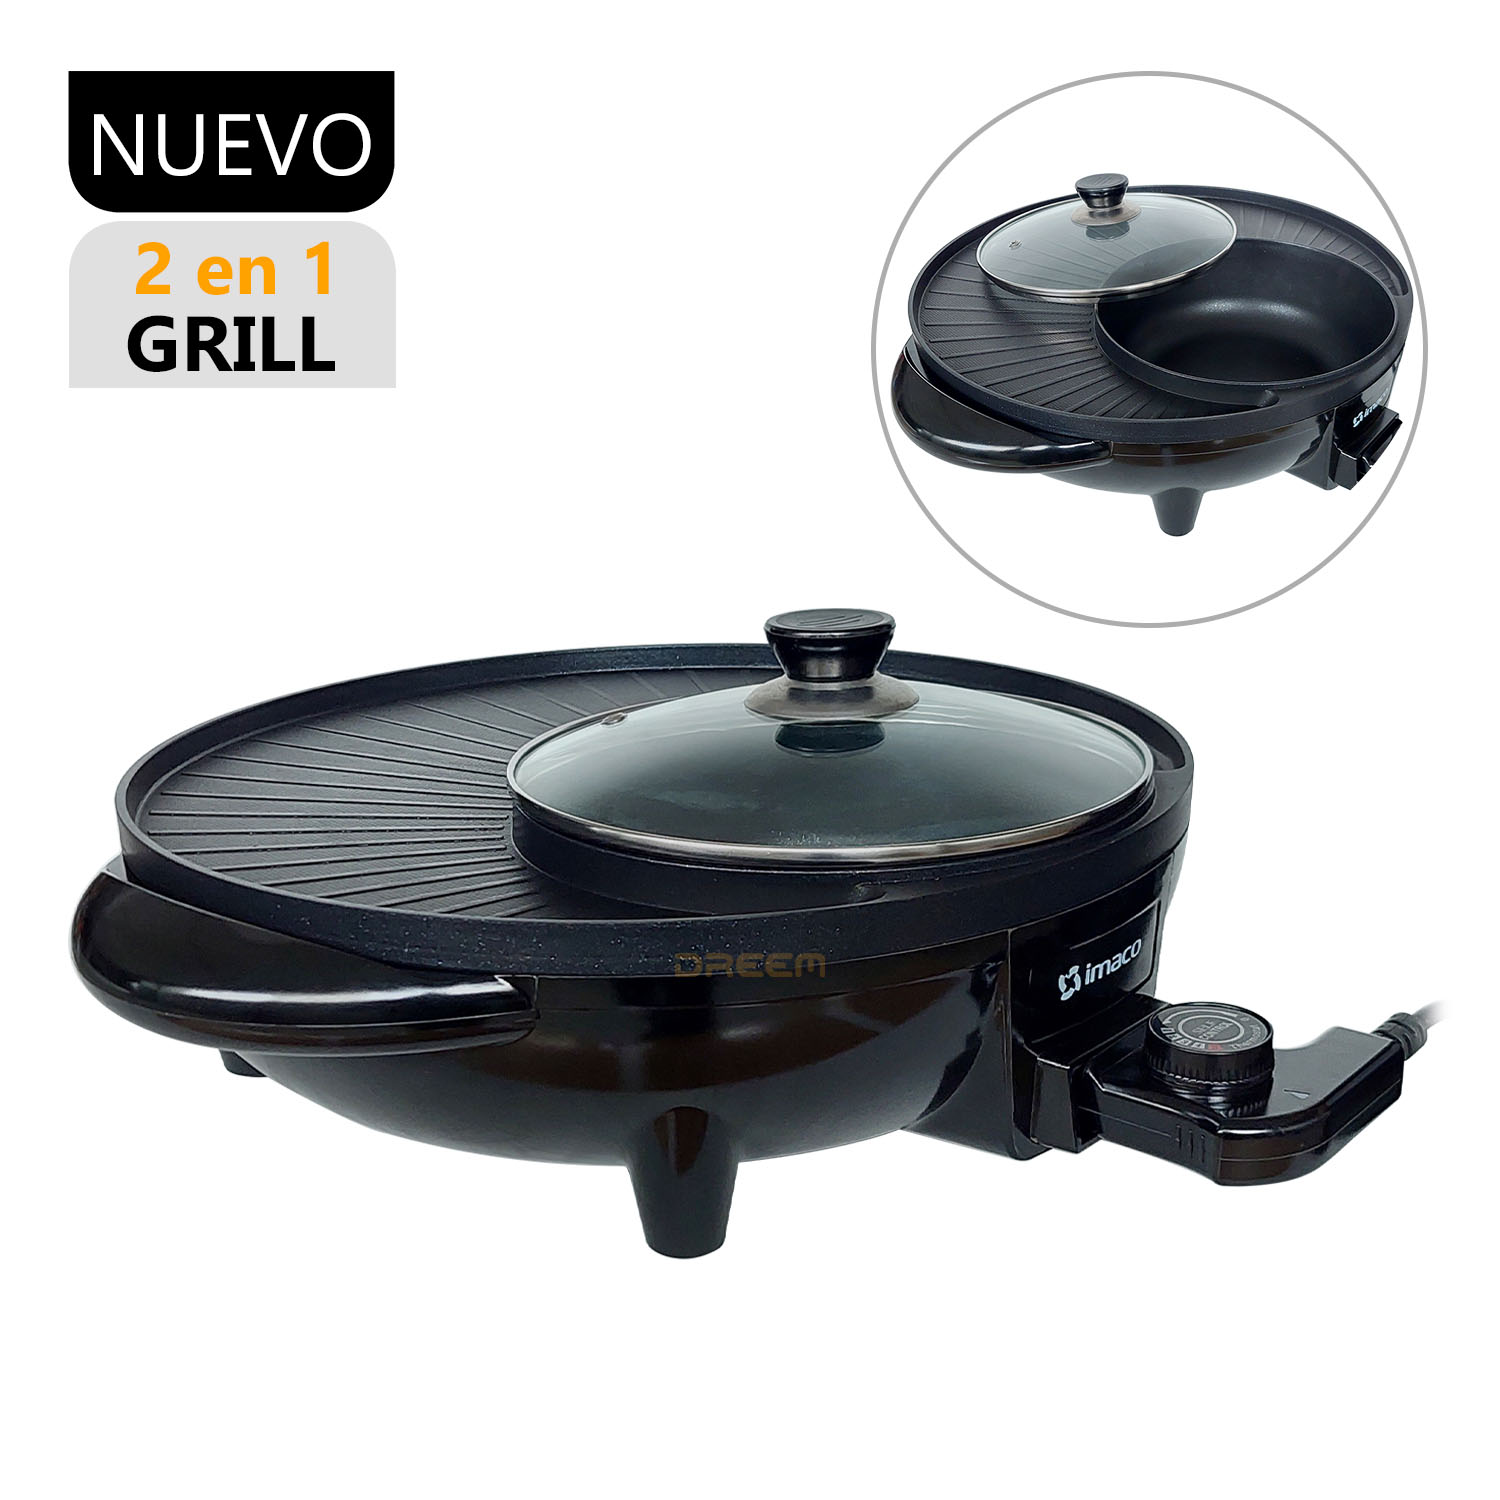 Grill Super Cook Imaco IG1620 1650 Watts